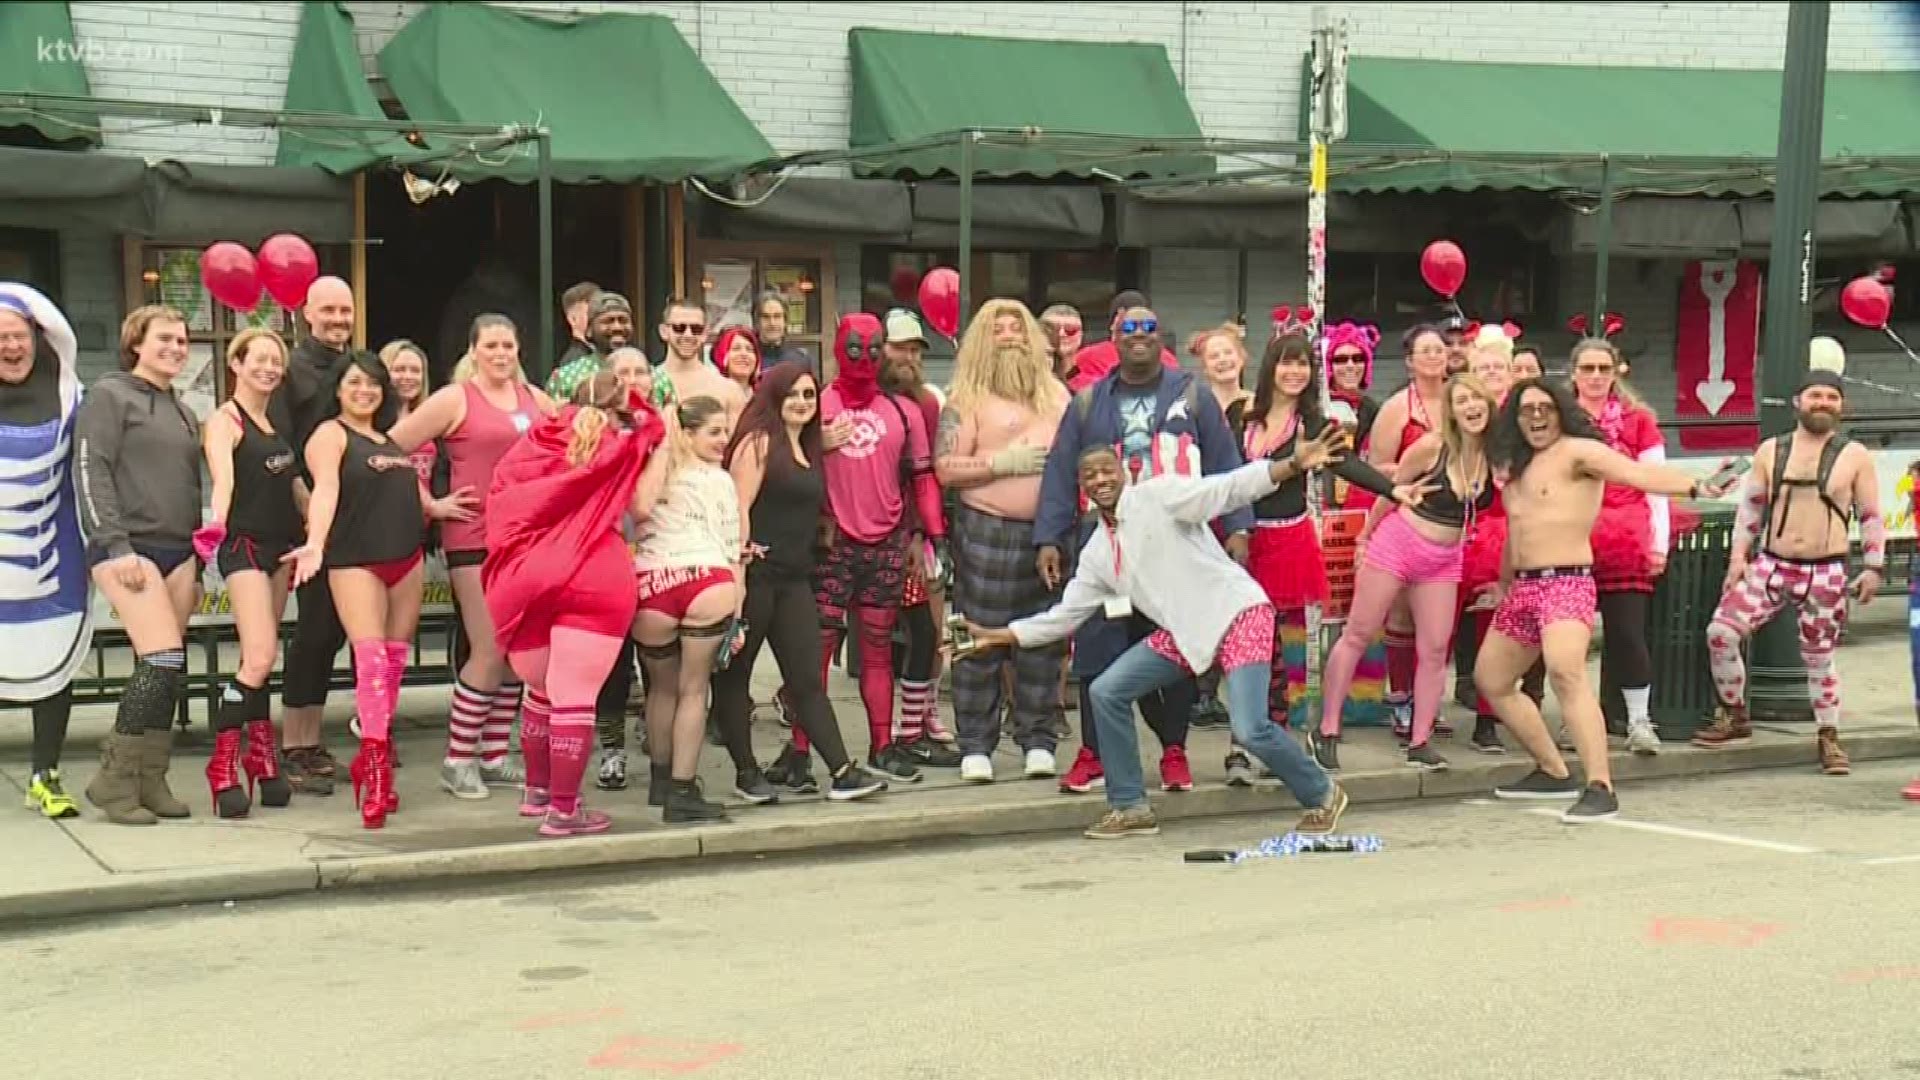 Locals braved the cold weather to raise awareness and money for Children's Tumor Foundation.